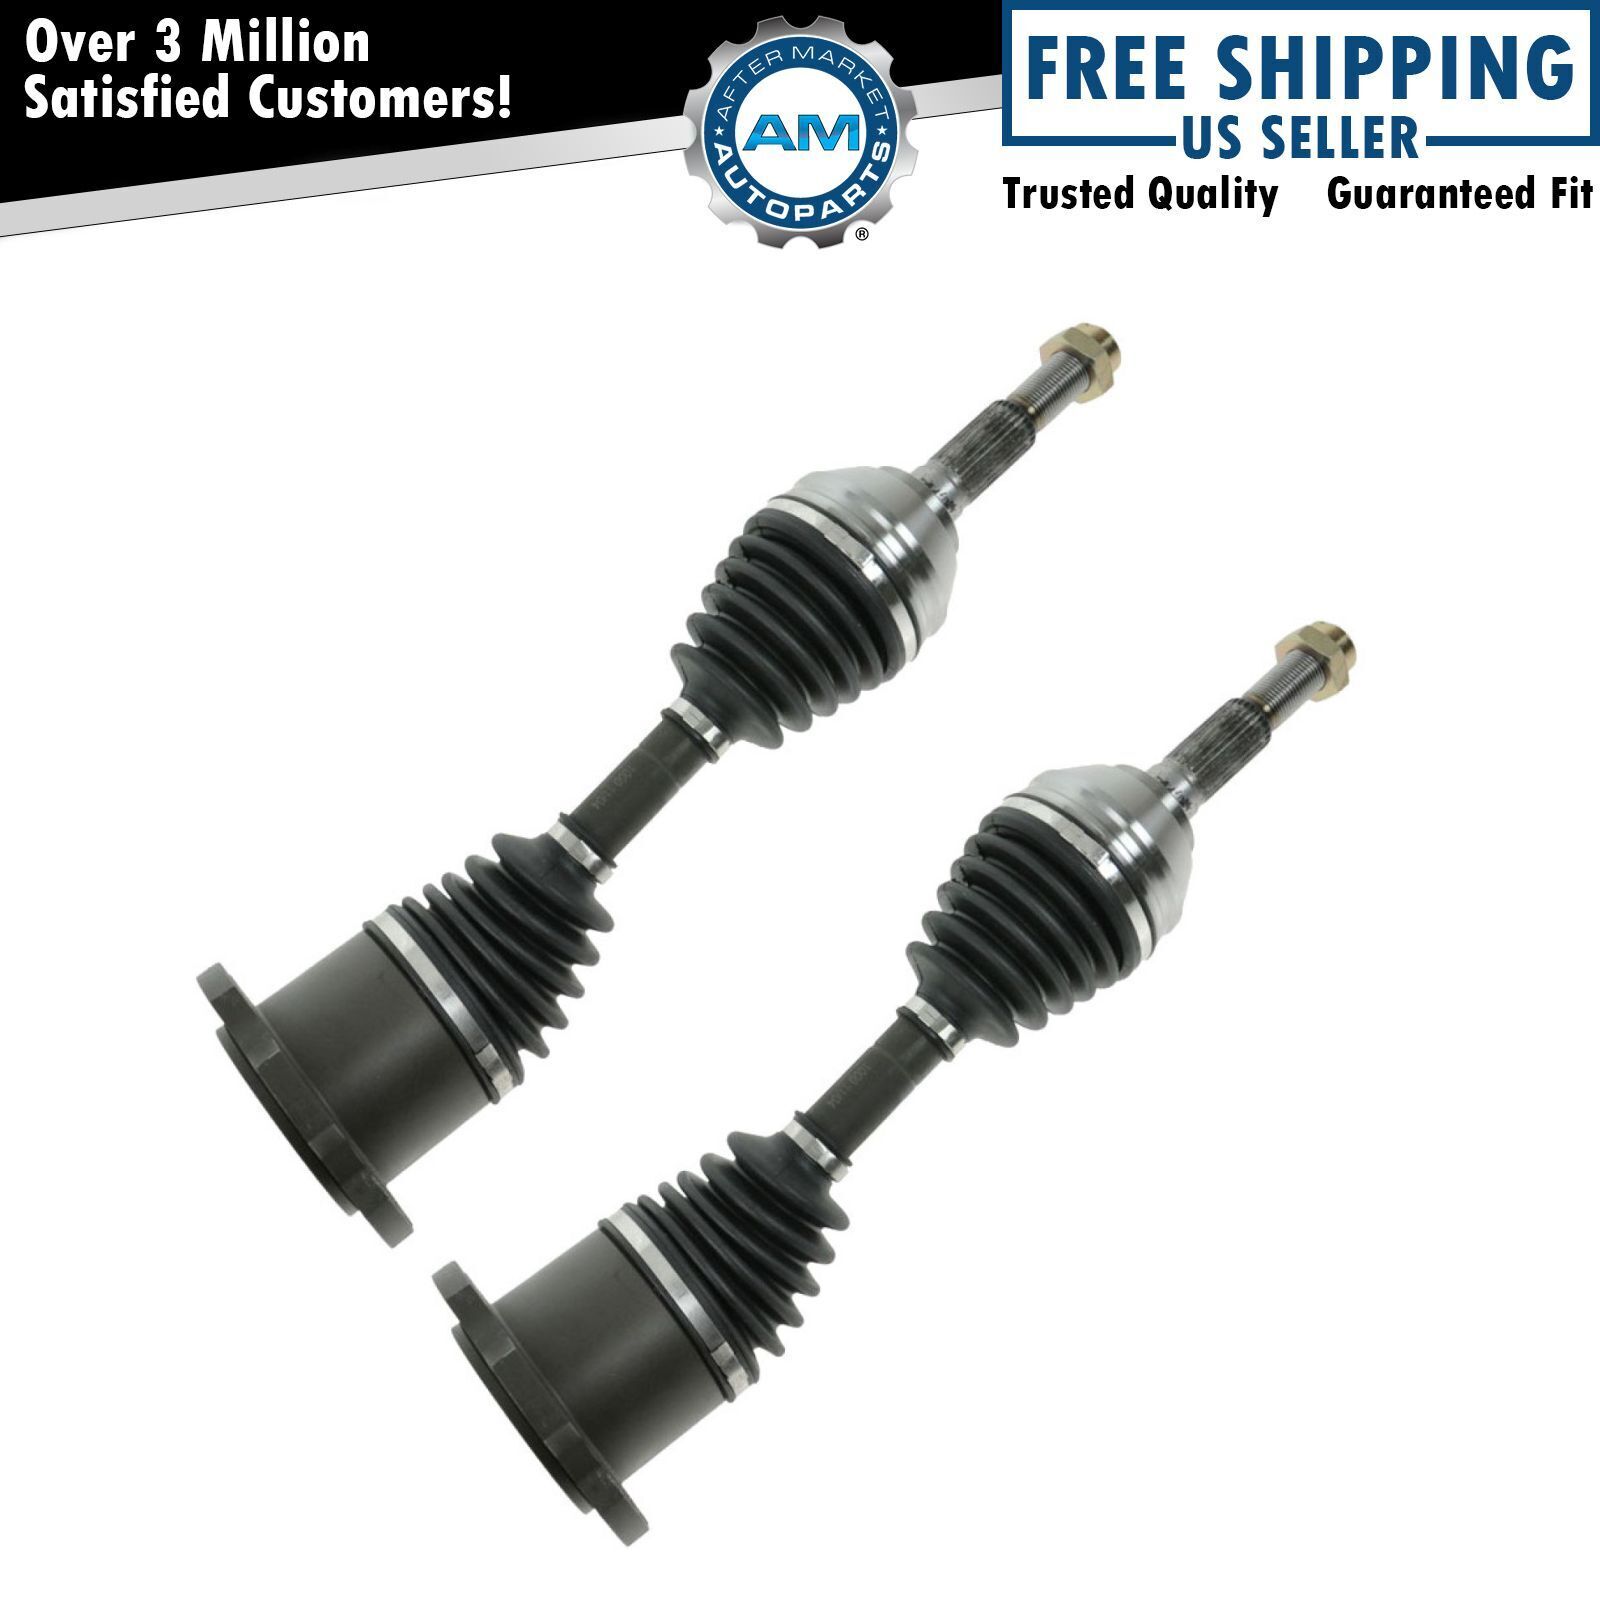 Front CV Axle Shaft Set Pair for Typhoon Bravada Syclone Pickup Truck S10 S15